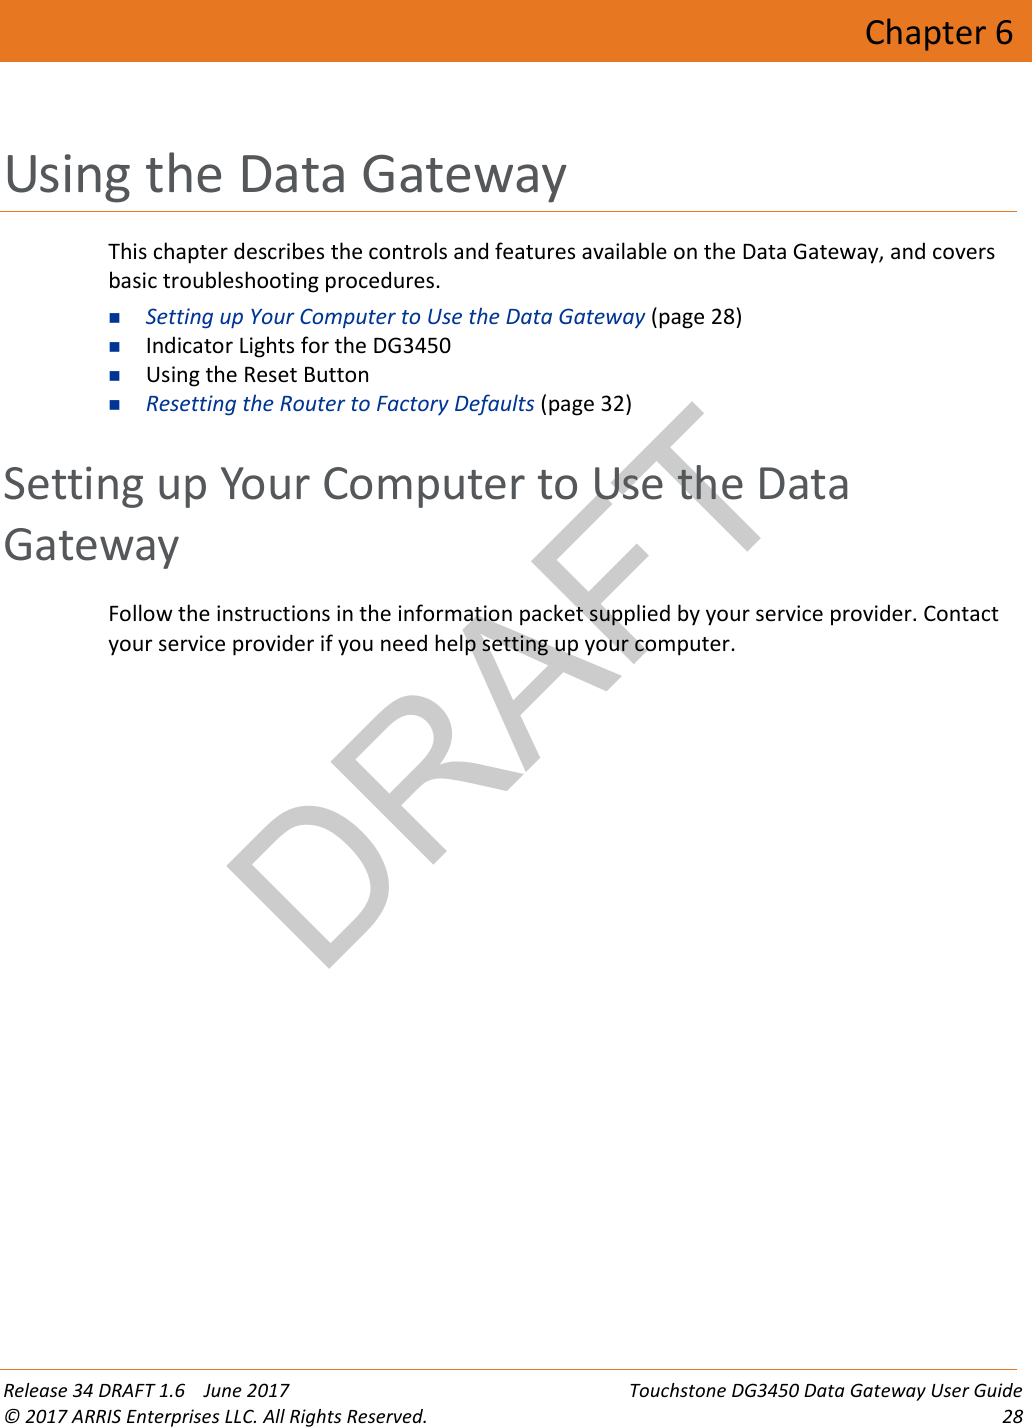 DRAFT Release 34 DRAFT 1.6    June 2017 Touchstone DG3450 Data Gateway User Guide © 2017 ARRIS Enterprises LLC. All Rights Reserved. 28  Chapter 6 Using the Data Gateway This chapter describes the controls and features available on the Data Gateway, and covers basic troubleshooting procedures.  Setting up Your Computer to Use the Data Gateway (page 28)  Indicator Lights for the DG3450  Using the Reset Button  Resetting the Router to Factory Defaults (page 32)   Setting up Your Computer to Use the Data Gateway Follow the instructions in the information packet supplied by your service provider. Contact your service provider if you need help setting up your computer.   